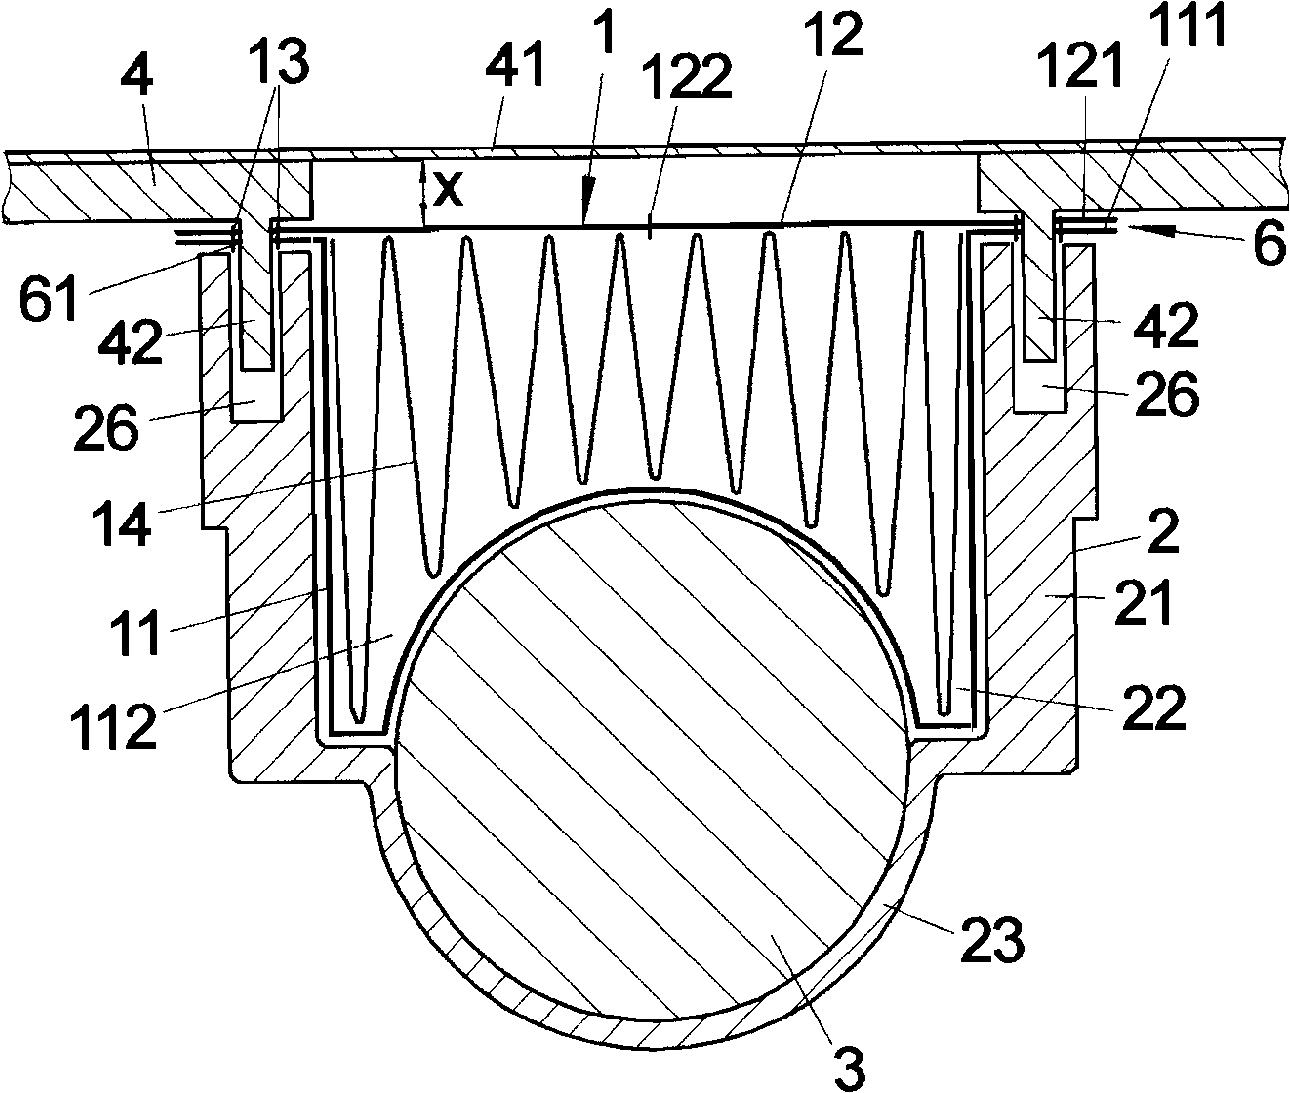 Airbag module for vehicle occupant restraint system